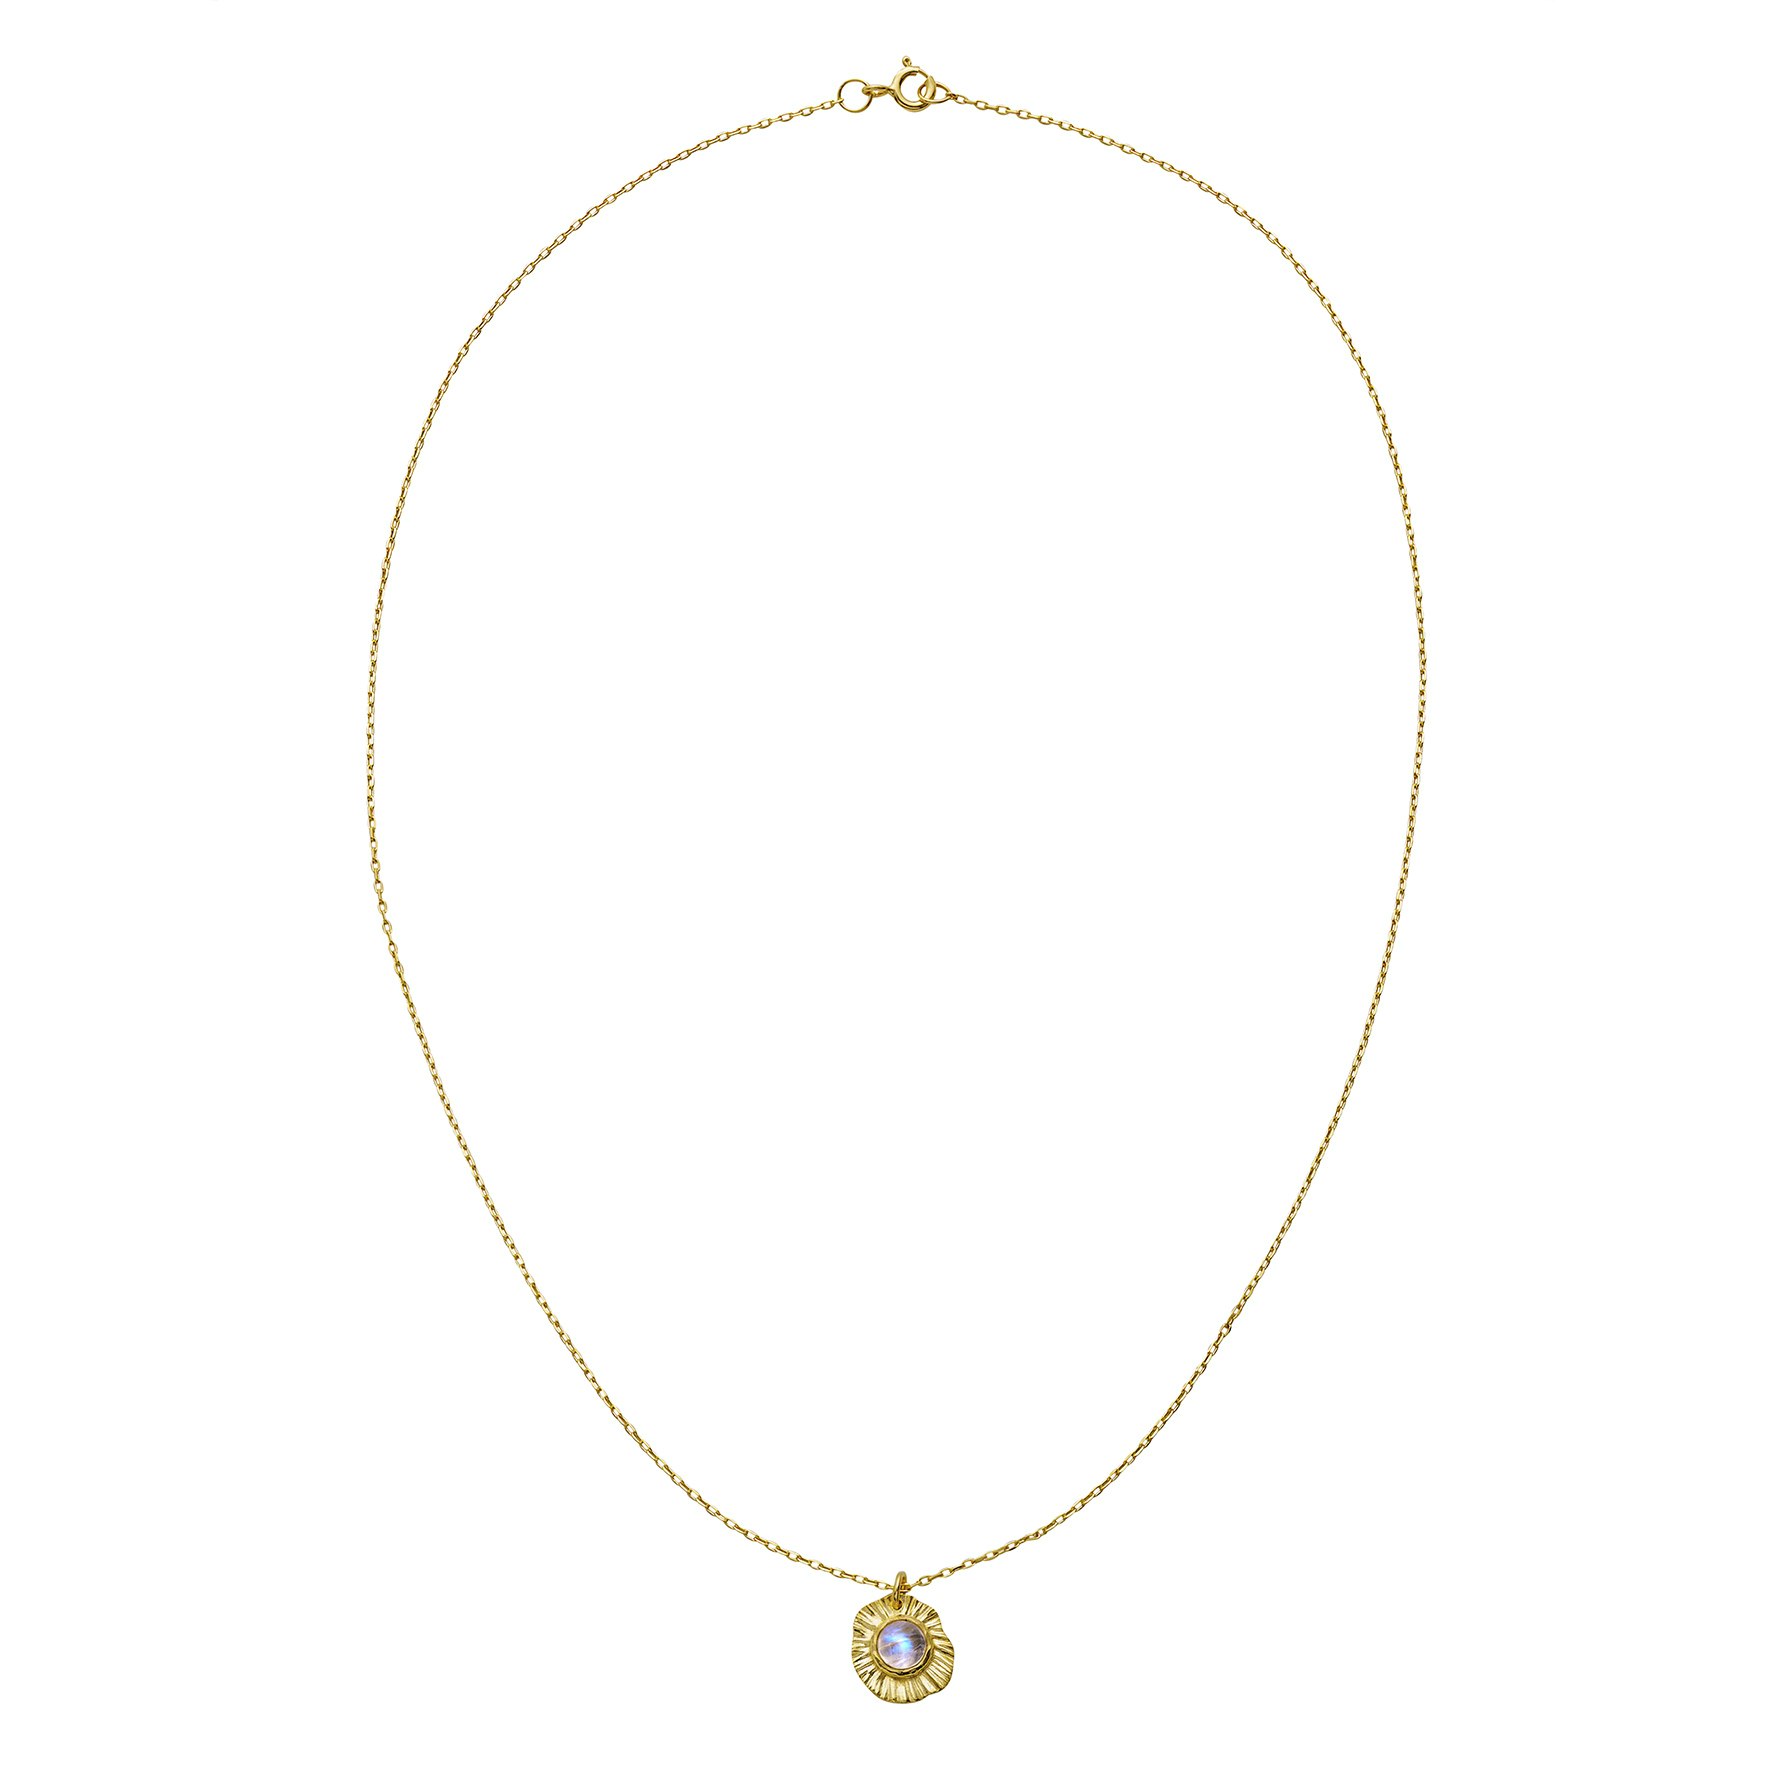 Astra Necklace from Maanesten in Goldplated Silver Sterling 925